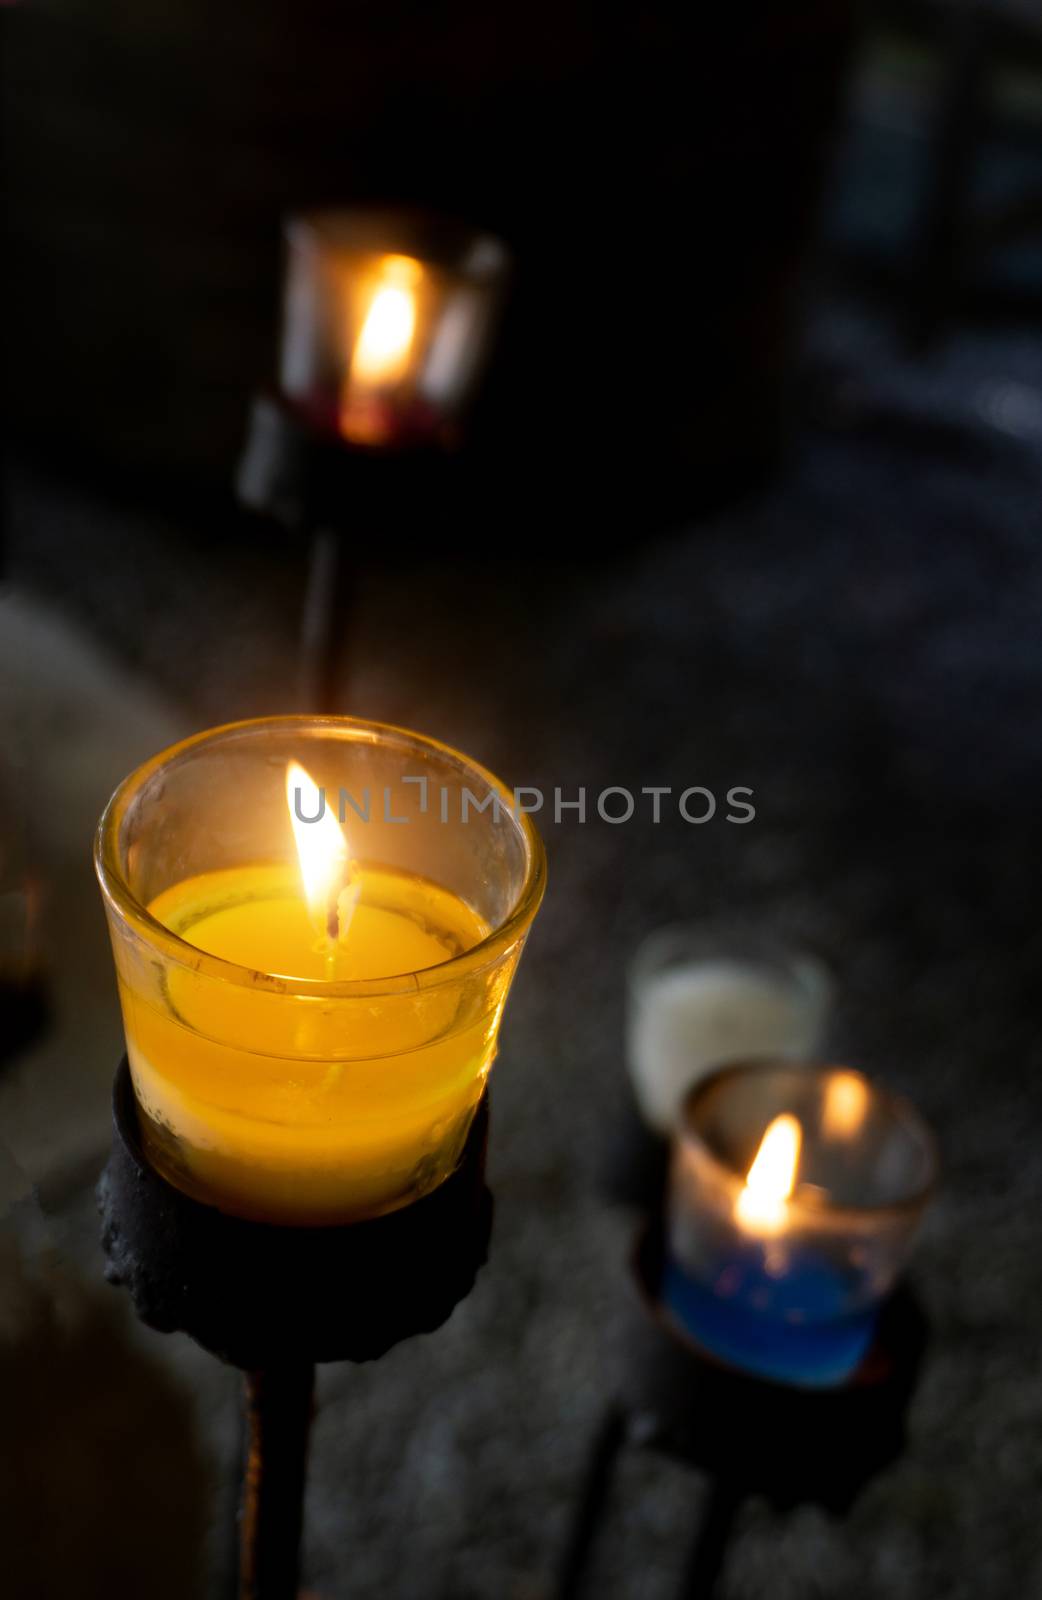 Candles placed in glass, placed on an iron base for decorations.